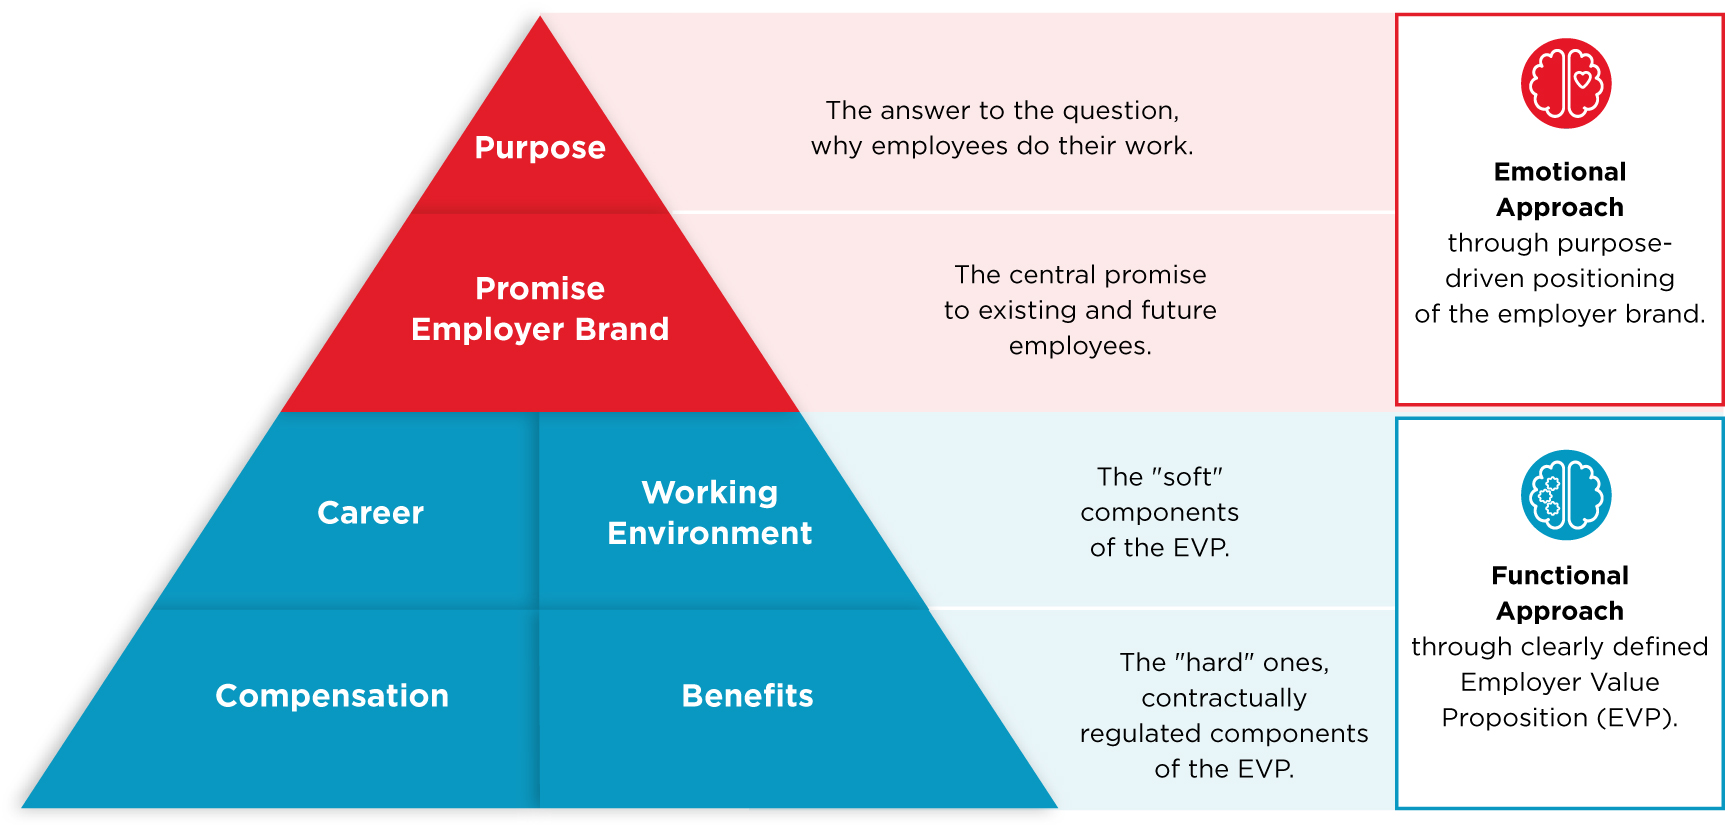 Employer Branding: Attracting and retaining talent with purpose - Employer Branding Example from EVP Model